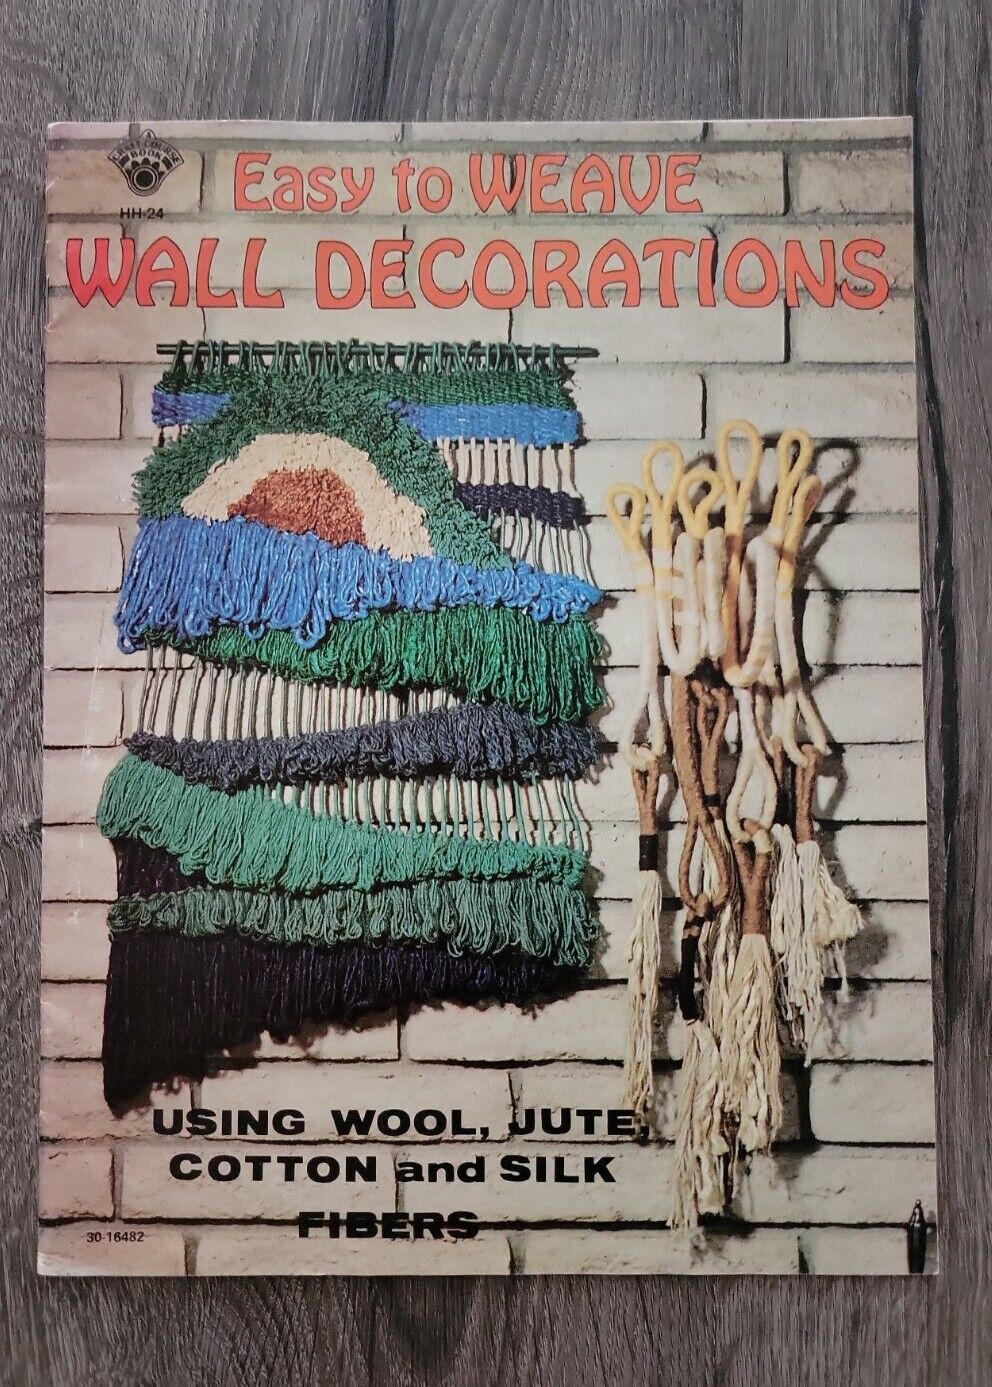 Easy To Weave Wall Decorations Booklet Weaving Instructions Patterns Vtg Hh24